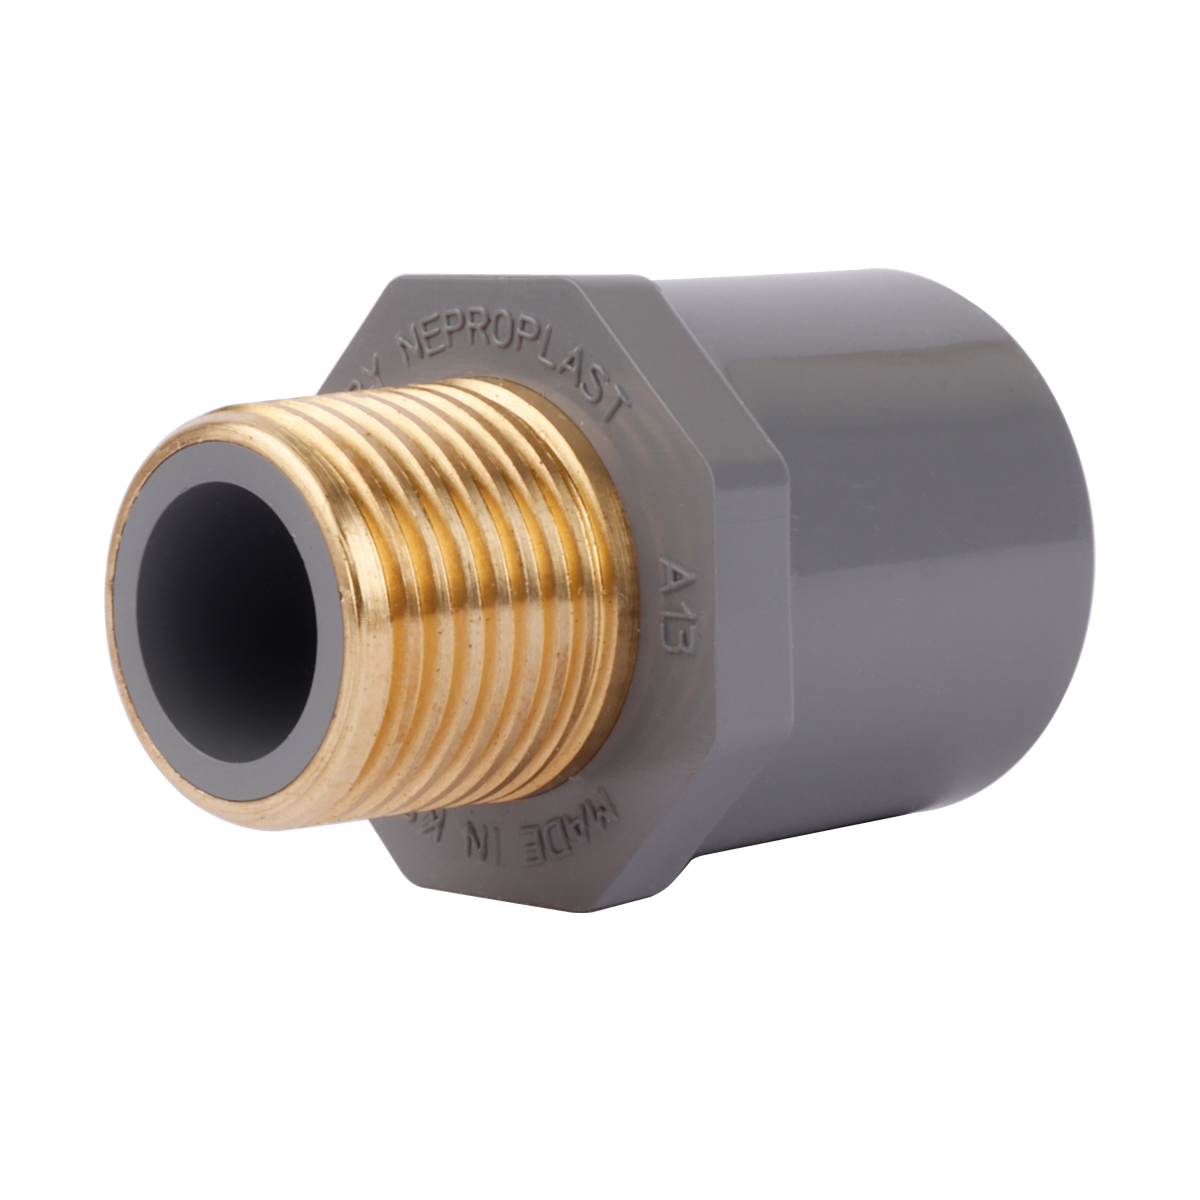 Brass Adapter 1¼ Fusion x 1¼ Male Pipe Thread